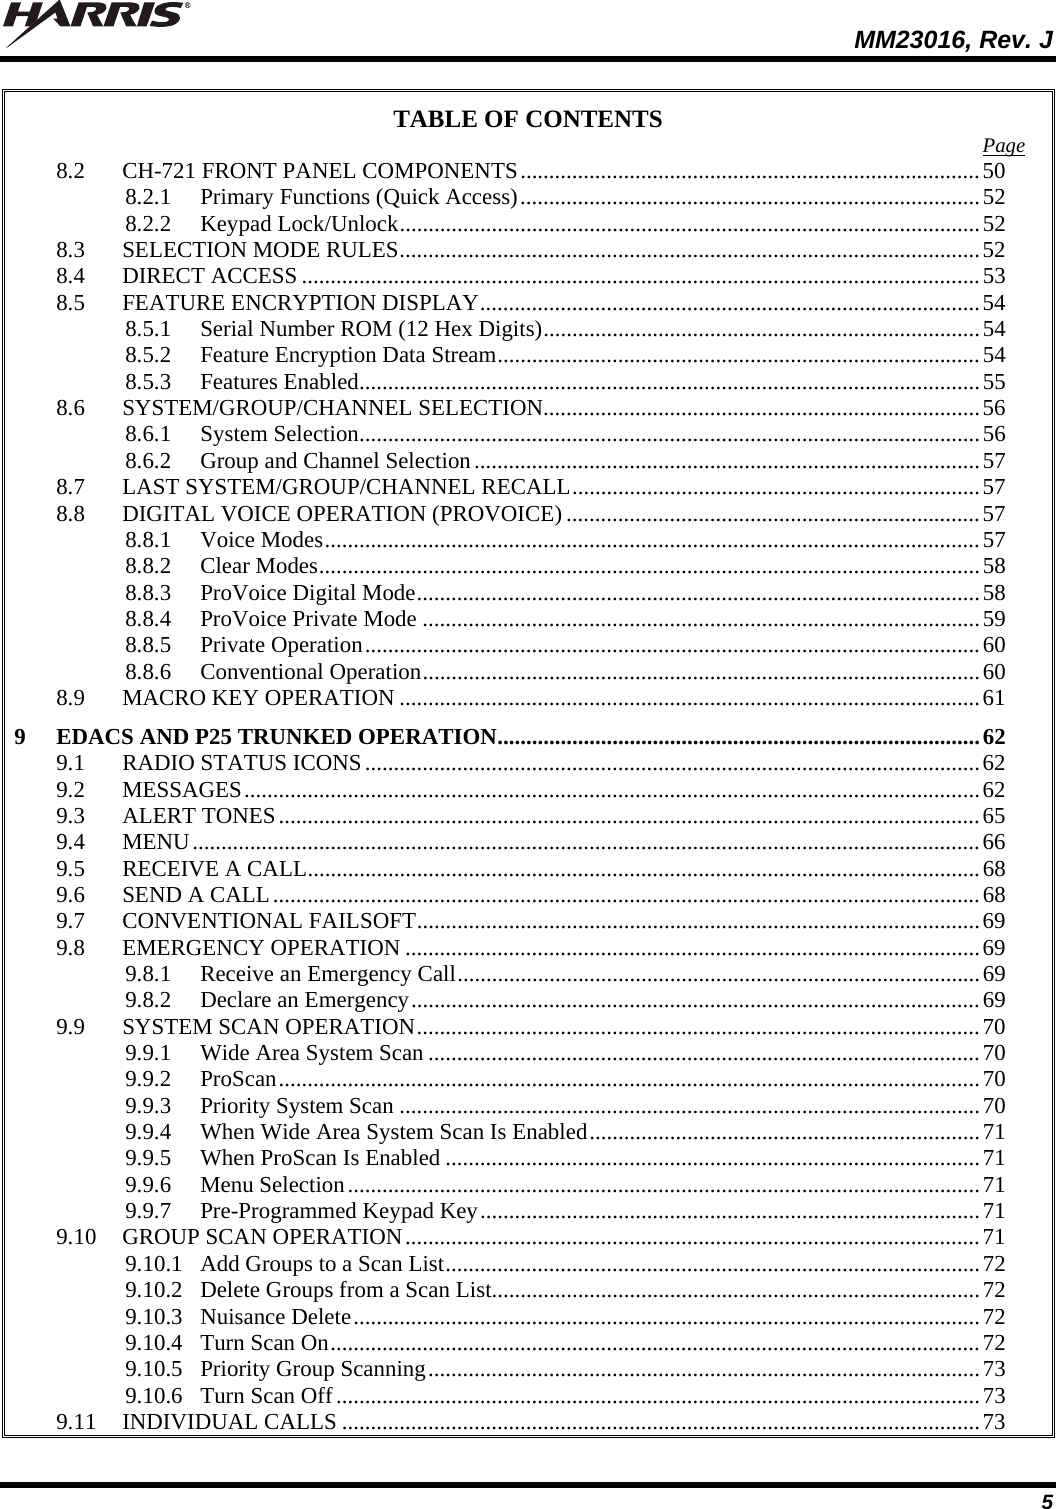  MM23016, Rev. J 5 TABLE OF CONTENTS  Page 8.2 CH-721 FRONT PANEL COMPONENTS................................................................................50 8.2.1 Primary Functions (Quick Access)................................................................................52 8.2.2 Keypad Lock/Unlock.....................................................................................................52 8.3 SELECTION MODE RULES.....................................................................................................52 8.4 DIRECT ACCESS ......................................................................................................................53 8.5 FEATURE ENCRYPTION DISPLAY.......................................................................................54 8.5.1 Serial Number ROM (12 Hex Digits)............................................................................54 8.5.2 Feature Encryption Data Stream....................................................................................54 8.5.3 Features Enabled............................................................................................................55 8.6 SYSTEM/GROUP/CHANNEL SELECTION............................................................................56 8.6.1 System Selection............................................................................................................56 8.6.2 Group and Channel Selection........................................................................................57 8.7 LAST SYSTEM/GROUP/CHANNEL RECALL.......................................................................57 8.8 DIGITAL VOICE OPERATION (PROVOICE) ........................................................................57 8.8.1 Voice Modes..................................................................................................................57 8.8.2 Clear Modes...................................................................................................................58 8.8.3 ProVoice Digital Mode..................................................................................................58 8.8.4 ProVoice Private Mode .................................................................................................59 8.8.5 Private Operation...........................................................................................................60 8.8.6 Conventional Operation.................................................................................................60 8.9 MACRO KEY OPERATION .....................................................................................................61 9 EDACS AND P25 TRUNKED OPERATION....................................................................................62 9.1 RADIO STATUS ICONS...........................................................................................................62 9.2 MESSAGES................................................................................................................................62 9.3 ALERT TONES..........................................................................................................................65 9.4 MENU.........................................................................................................................................66 9.5 RECEIVE A CALL.....................................................................................................................68 9.6 SEND A CALL...........................................................................................................................68 9.7 CONVENTIONAL FAILSOFT..................................................................................................69 9.8 EMERGENCY OPERATION ....................................................................................................69 9.8.1 Receive an Emergency Call...........................................................................................69 9.8.2 Declare an Emergency...................................................................................................69 9.9 SYSTEM SCAN OPERATION..................................................................................................70 9.9.1 Wide Area System Scan ................................................................................................70 9.9.2 ProScan..........................................................................................................................70 9.9.3 Priority System Scan .....................................................................................................70 9.9.4 When Wide Area System Scan Is Enabled....................................................................71 9.9.5 When ProScan Is Enabled .............................................................................................71 9.9.6 Menu Selection..............................................................................................................71 9.9.7 Pre-Programmed Keypad Key.......................................................................................71 9.10 GROUP SCAN OPERATION....................................................................................................71 9.10.1 Add Groups to a Scan List.............................................................................................72 9.10.2 Delete Groups from a Scan List.....................................................................................72 9.10.3 Nuisance Delete.............................................................................................................72 9.10.4 Turn Scan On.................................................................................................................72 9.10.5 Priority Group Scanning................................................................................................73 9.10.6 Turn Scan Off................................................................................................................73 9.11 INDIVIDUAL CALLS ...............................................................................................................73 